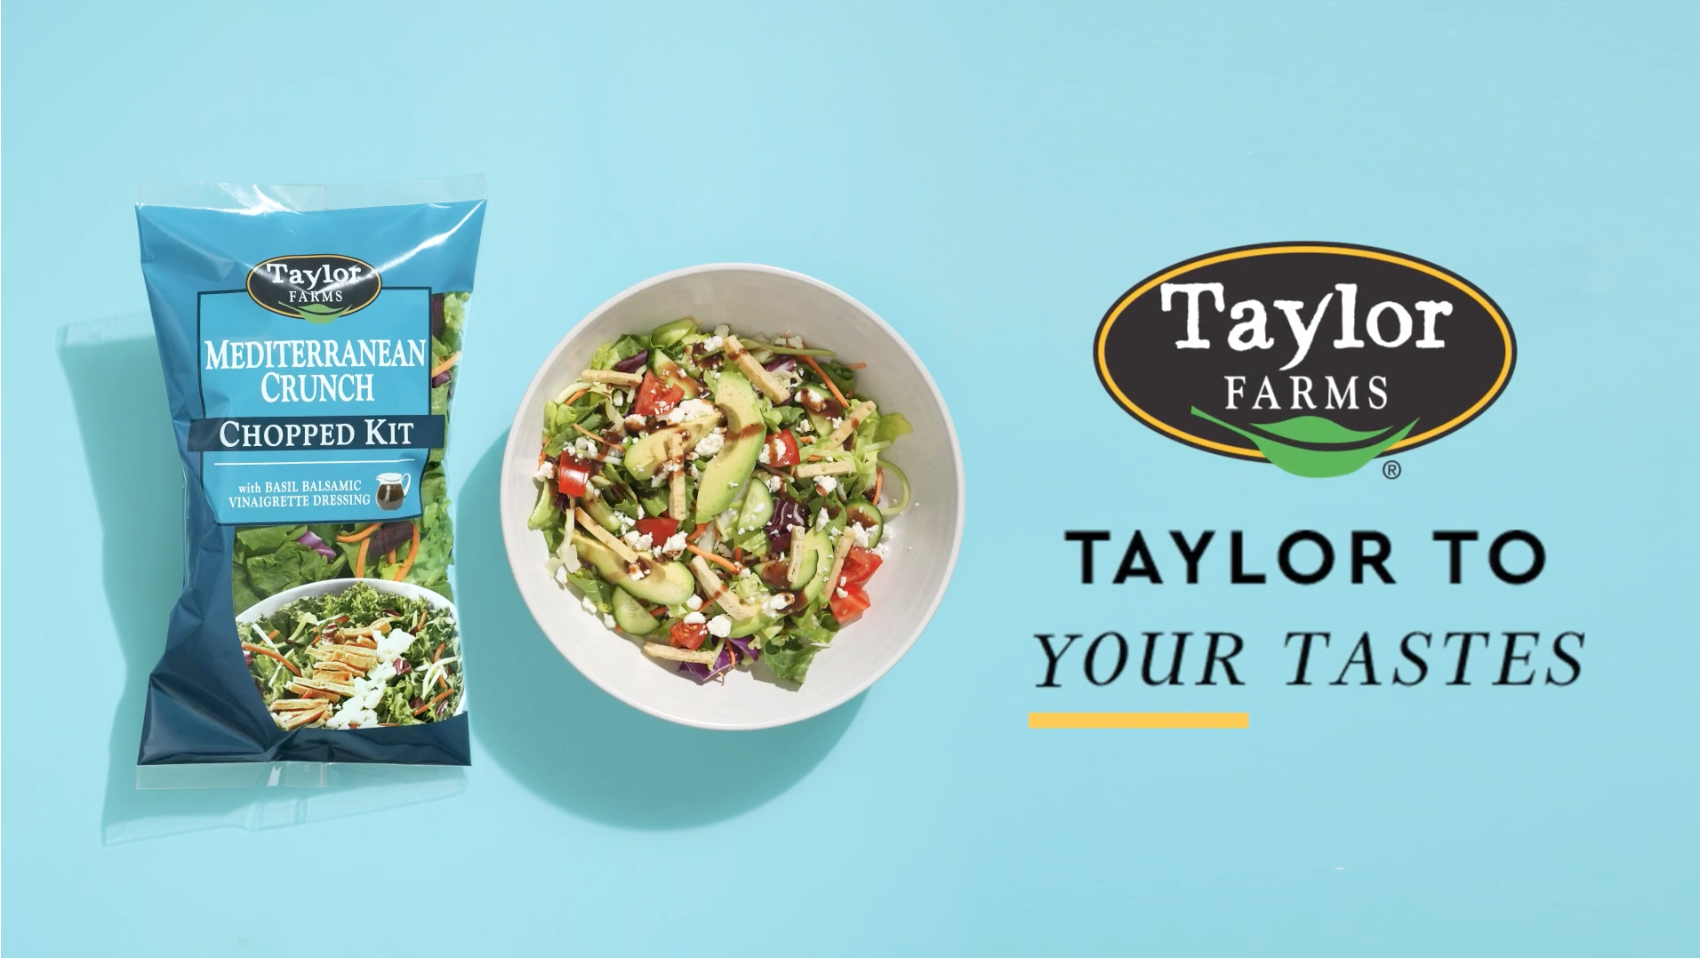 https://www.taylorfarms.com/wp-content/uploads/2021/04/Mediterranean-Crunch-Chopped-Salad-YouTube-Video.png